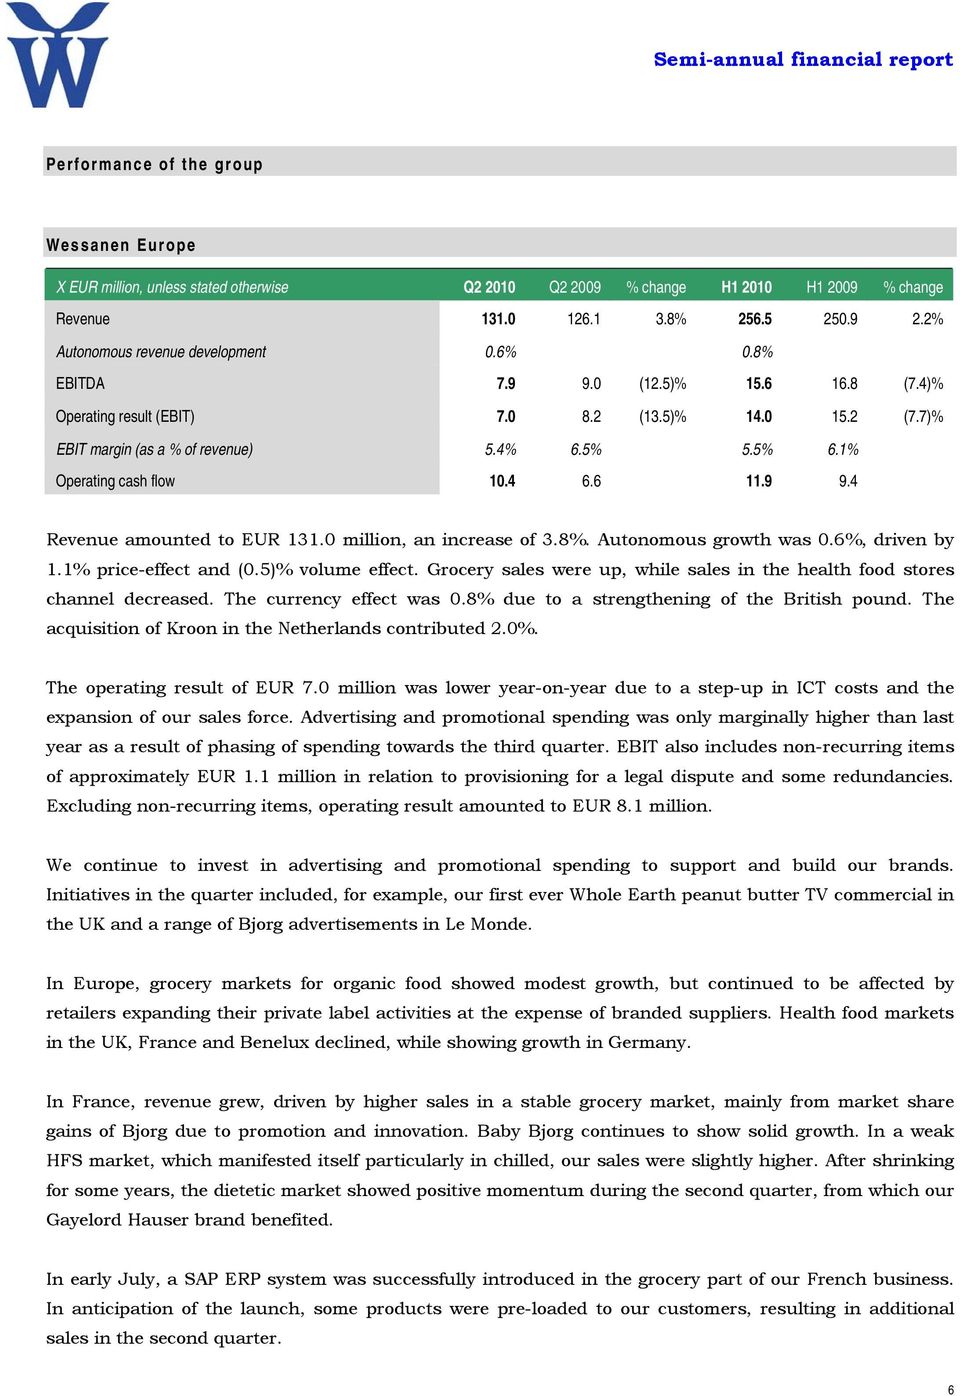 1% Operating cash flow 10.4 6.6 11.9 9.4 Revenue amounted to EUR 131.0 million, an increase of 3.8%. Autonomous growth was 0.6%, driven by 1.1% price-effect and (0.5)% volume effect.